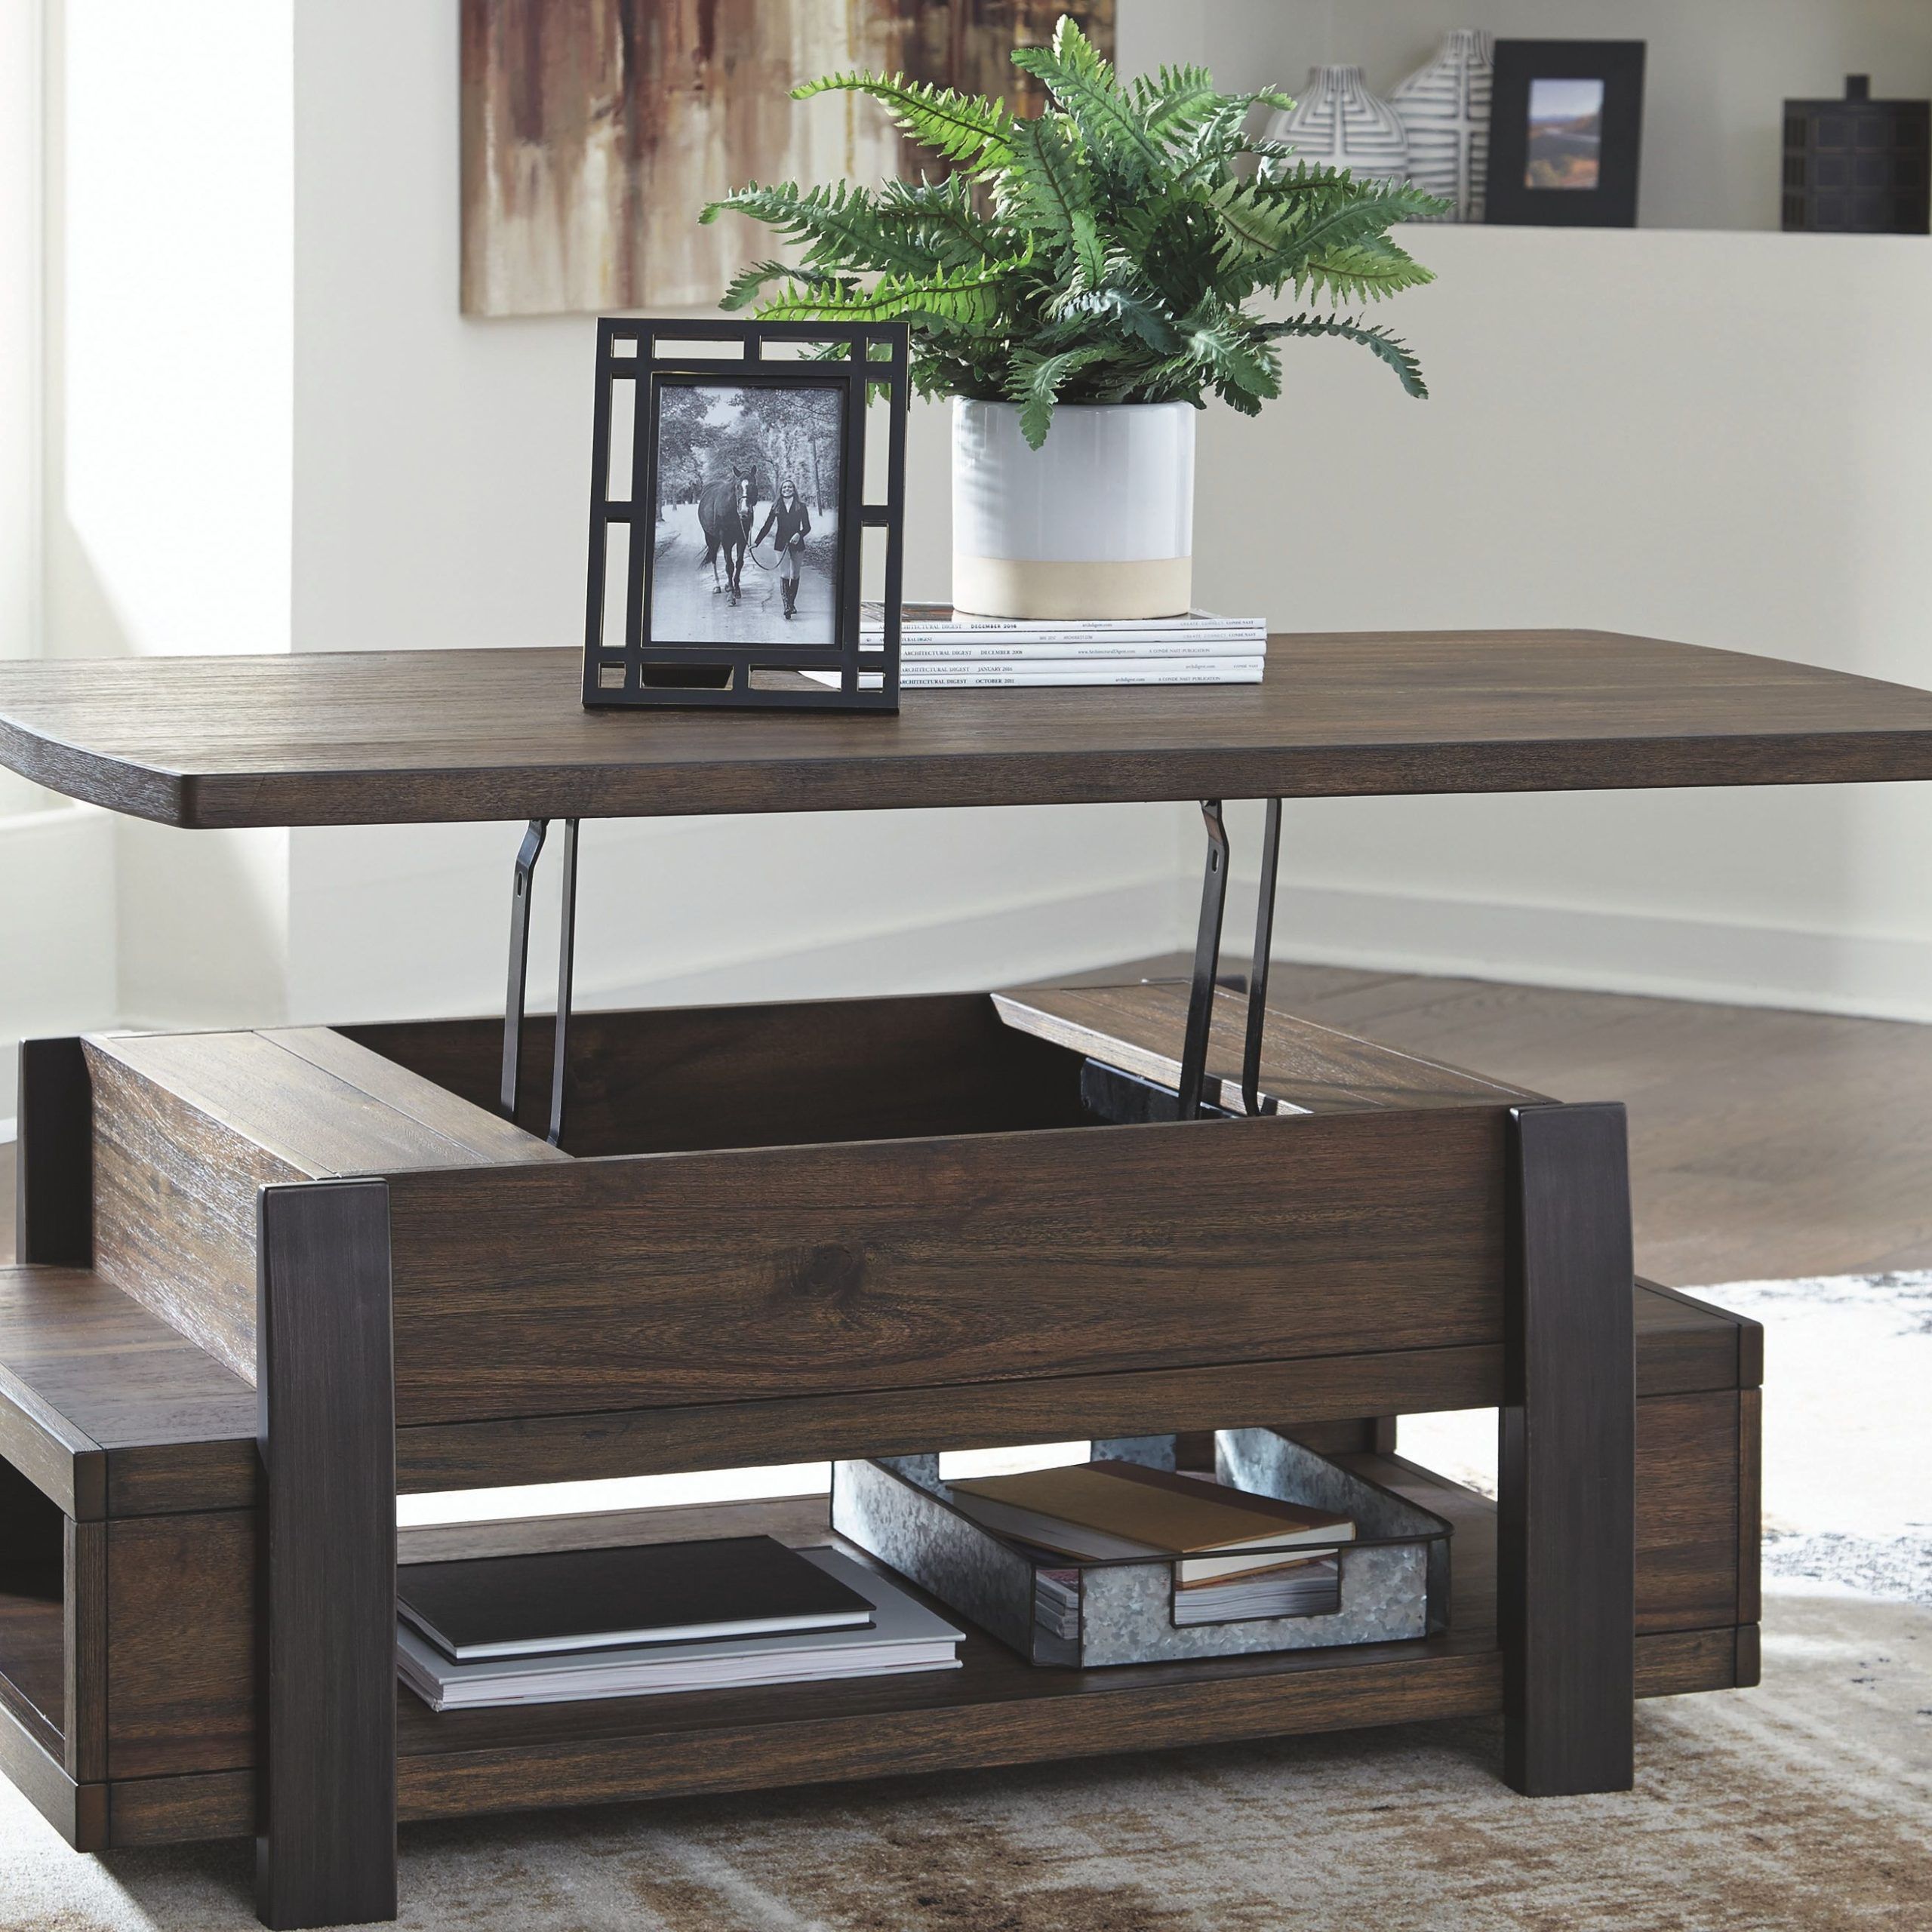 Why The Lift Table Coffee Table Is A Must Have For The Modern Home Intended For Modern Wooden Lift Top Tables (View 6 of 15)